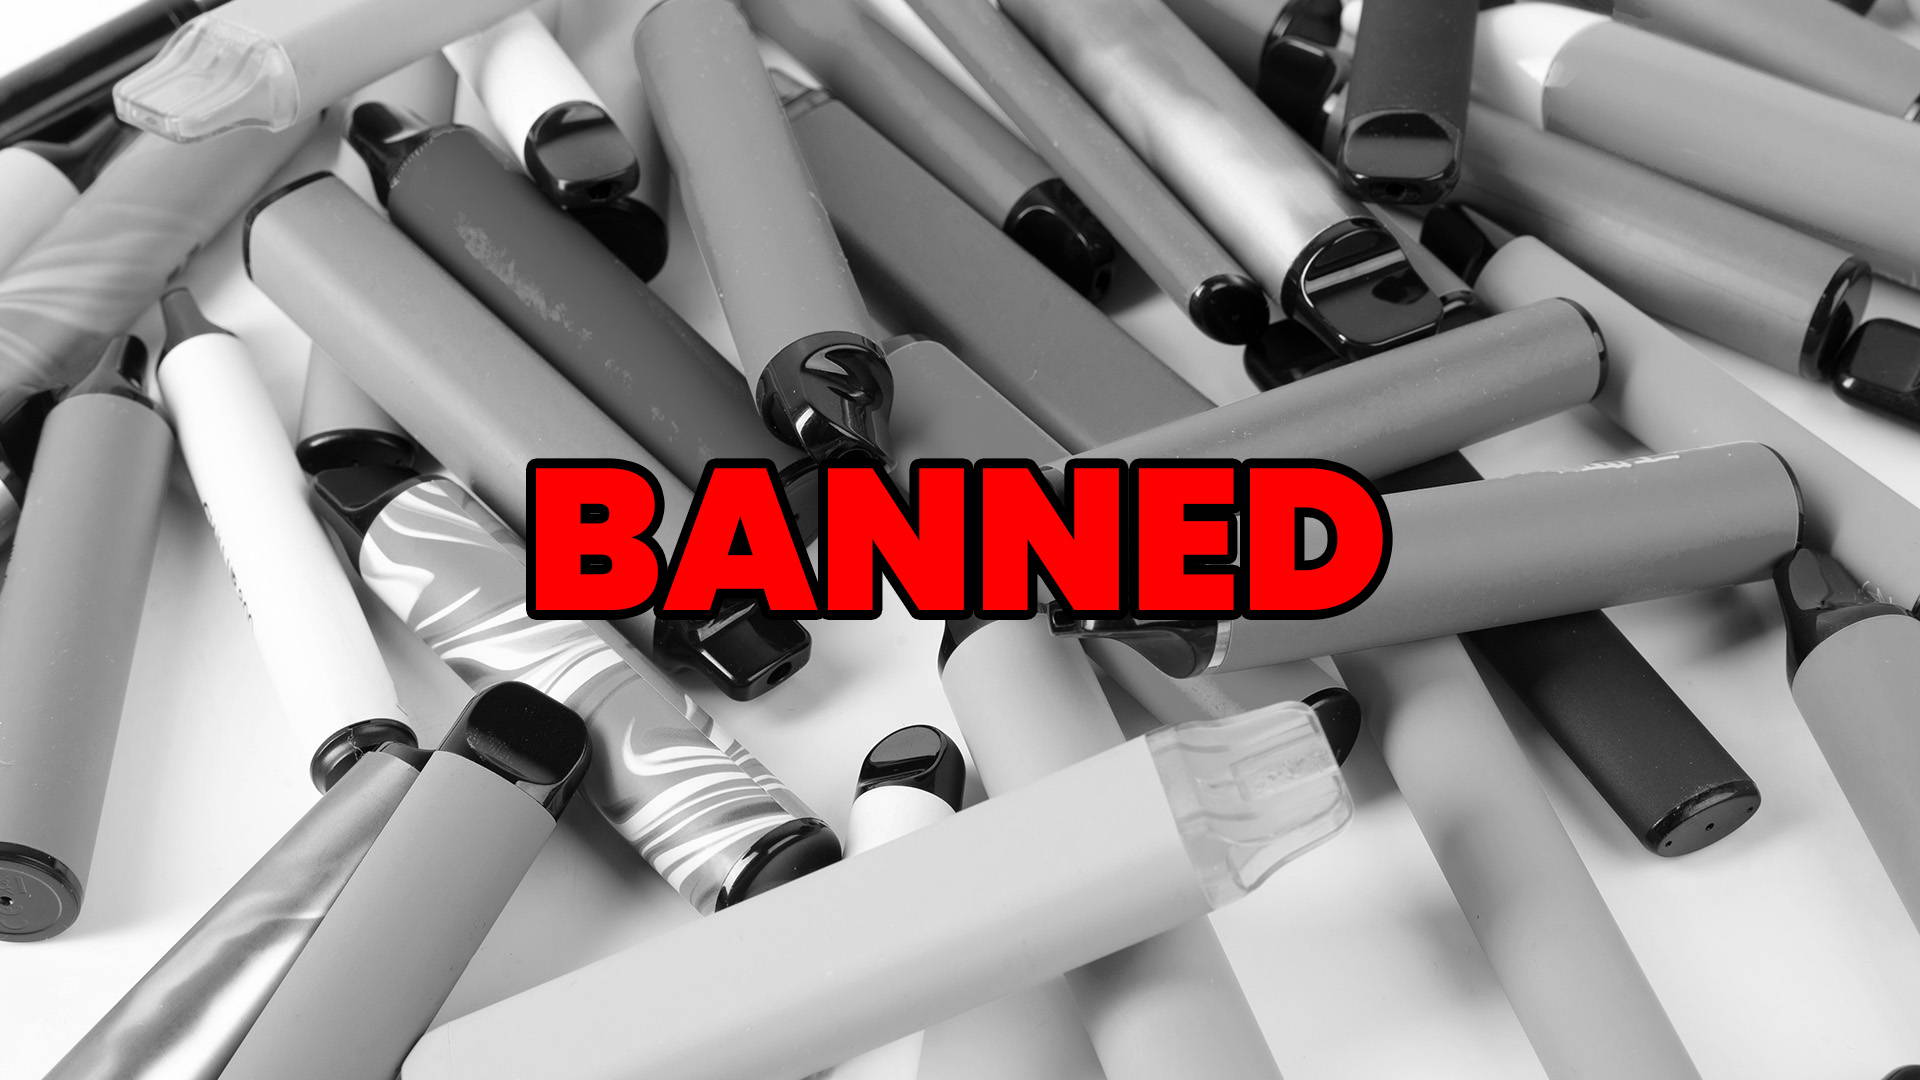 An image of disposable with the word 'banned' written over it.